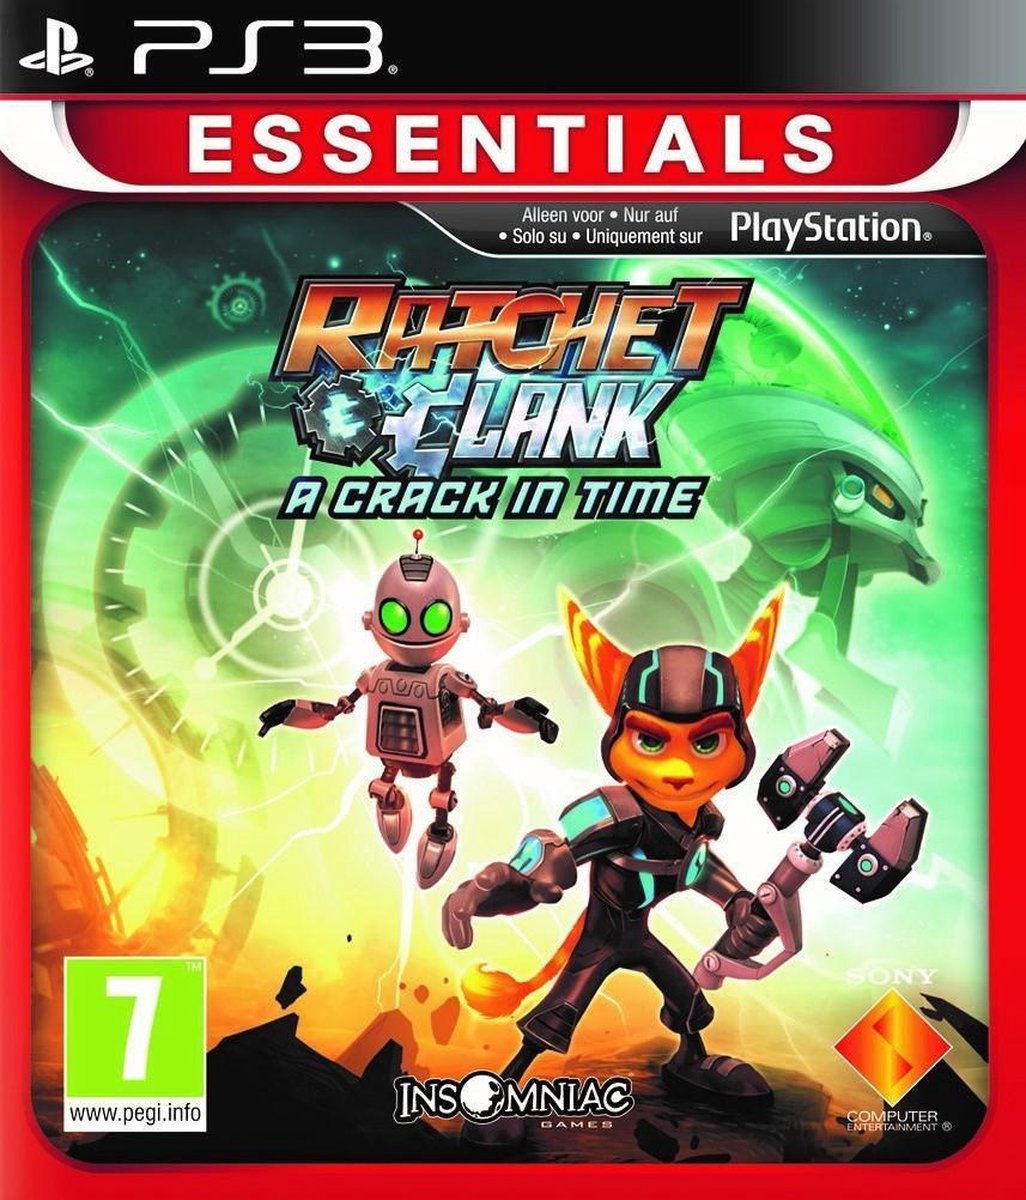 Ratchet & Clank a crack in time Gamesellers.nl